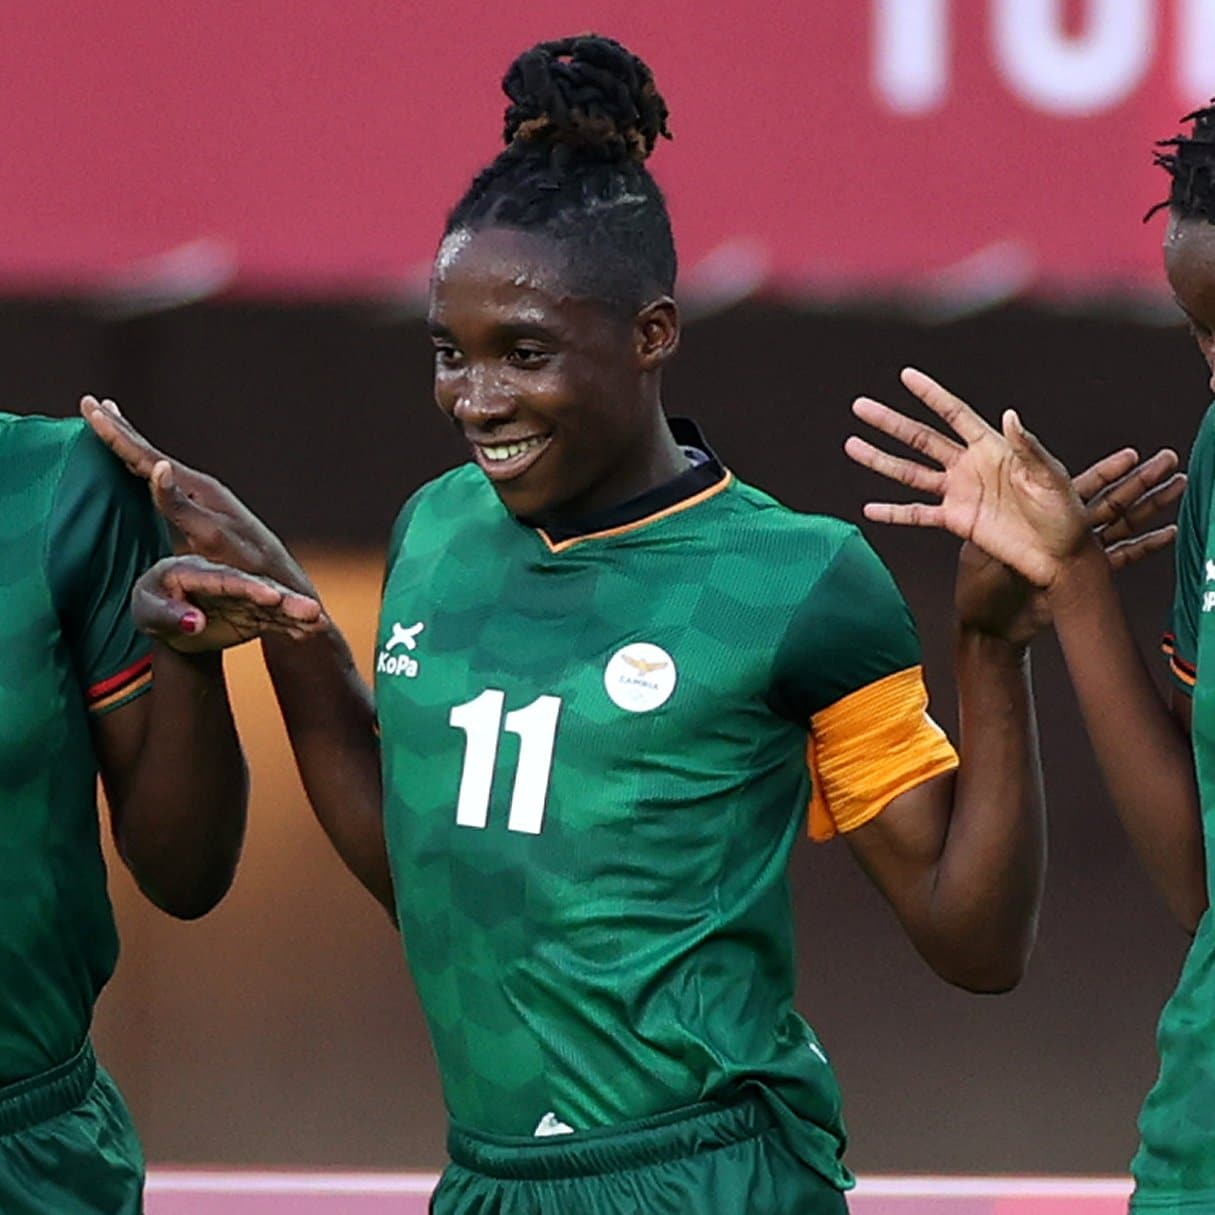 Tokyo 2020 Football: Banda Makes Olympic History Again As Zambia Hold China In Eight-Goal Thriller